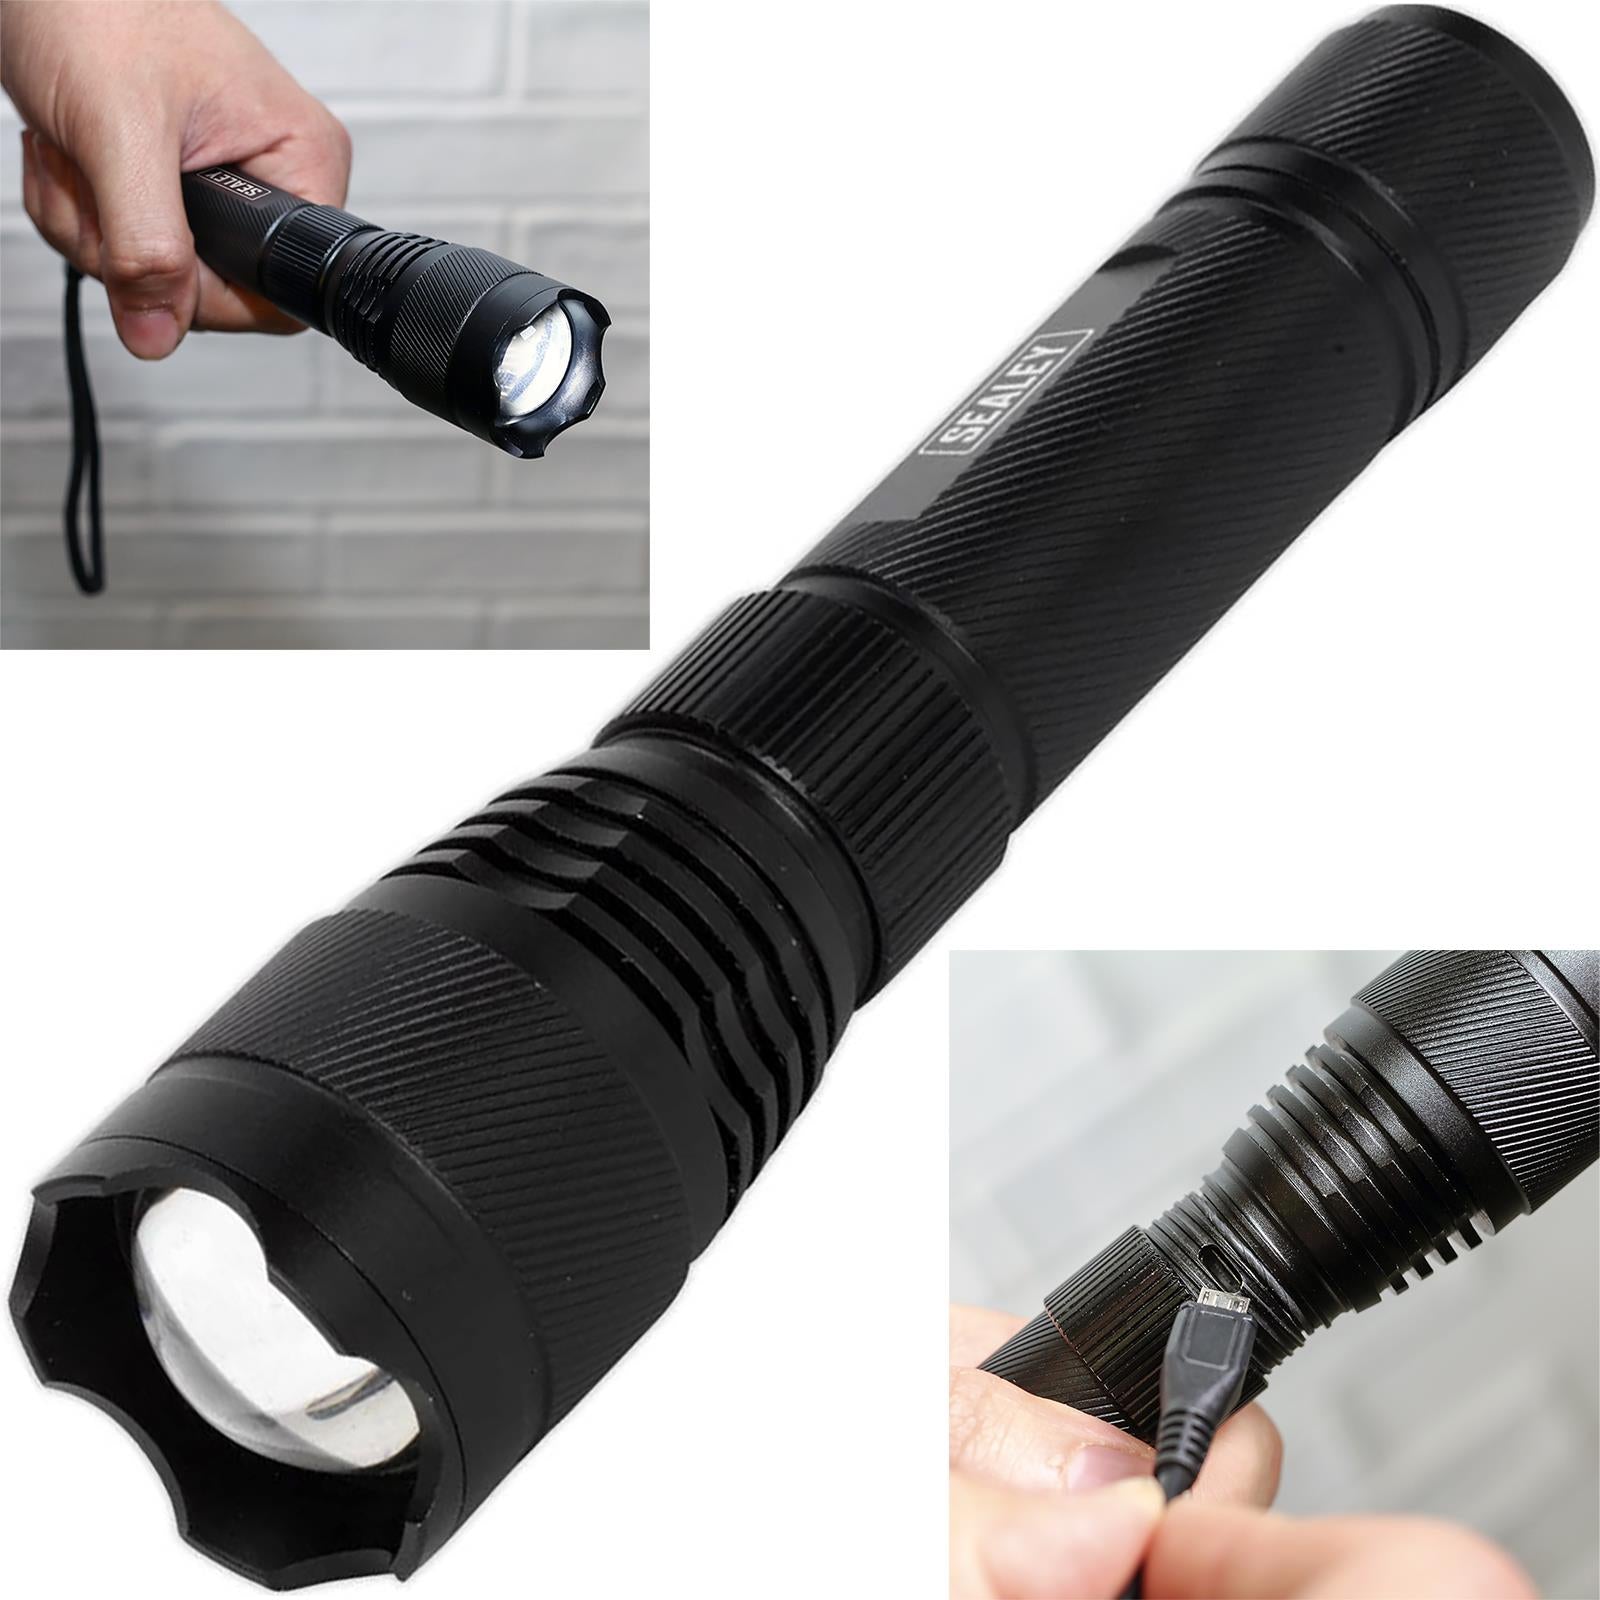 Sealey 10W T6 Cree LED Rechargeable Aluminium Torch 500 Lumens Adjustable Focus